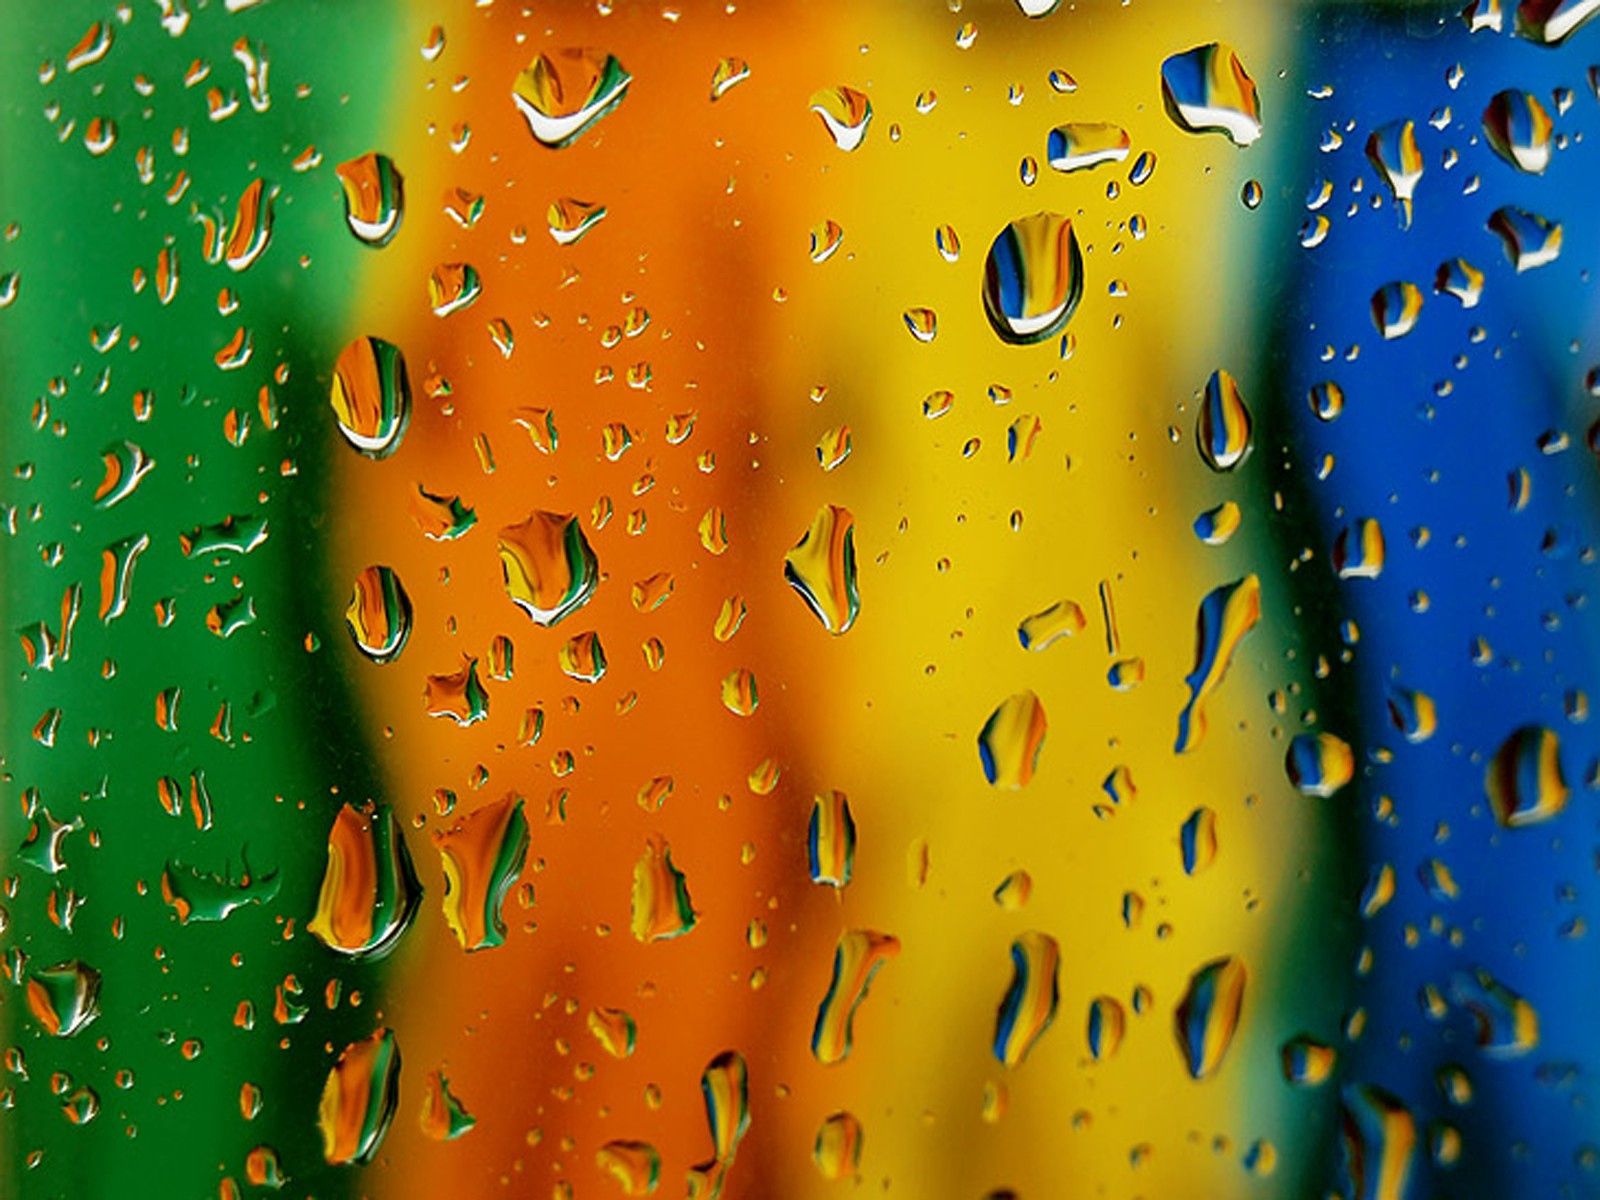 multicolored, motley, drops, texture, textures, surface